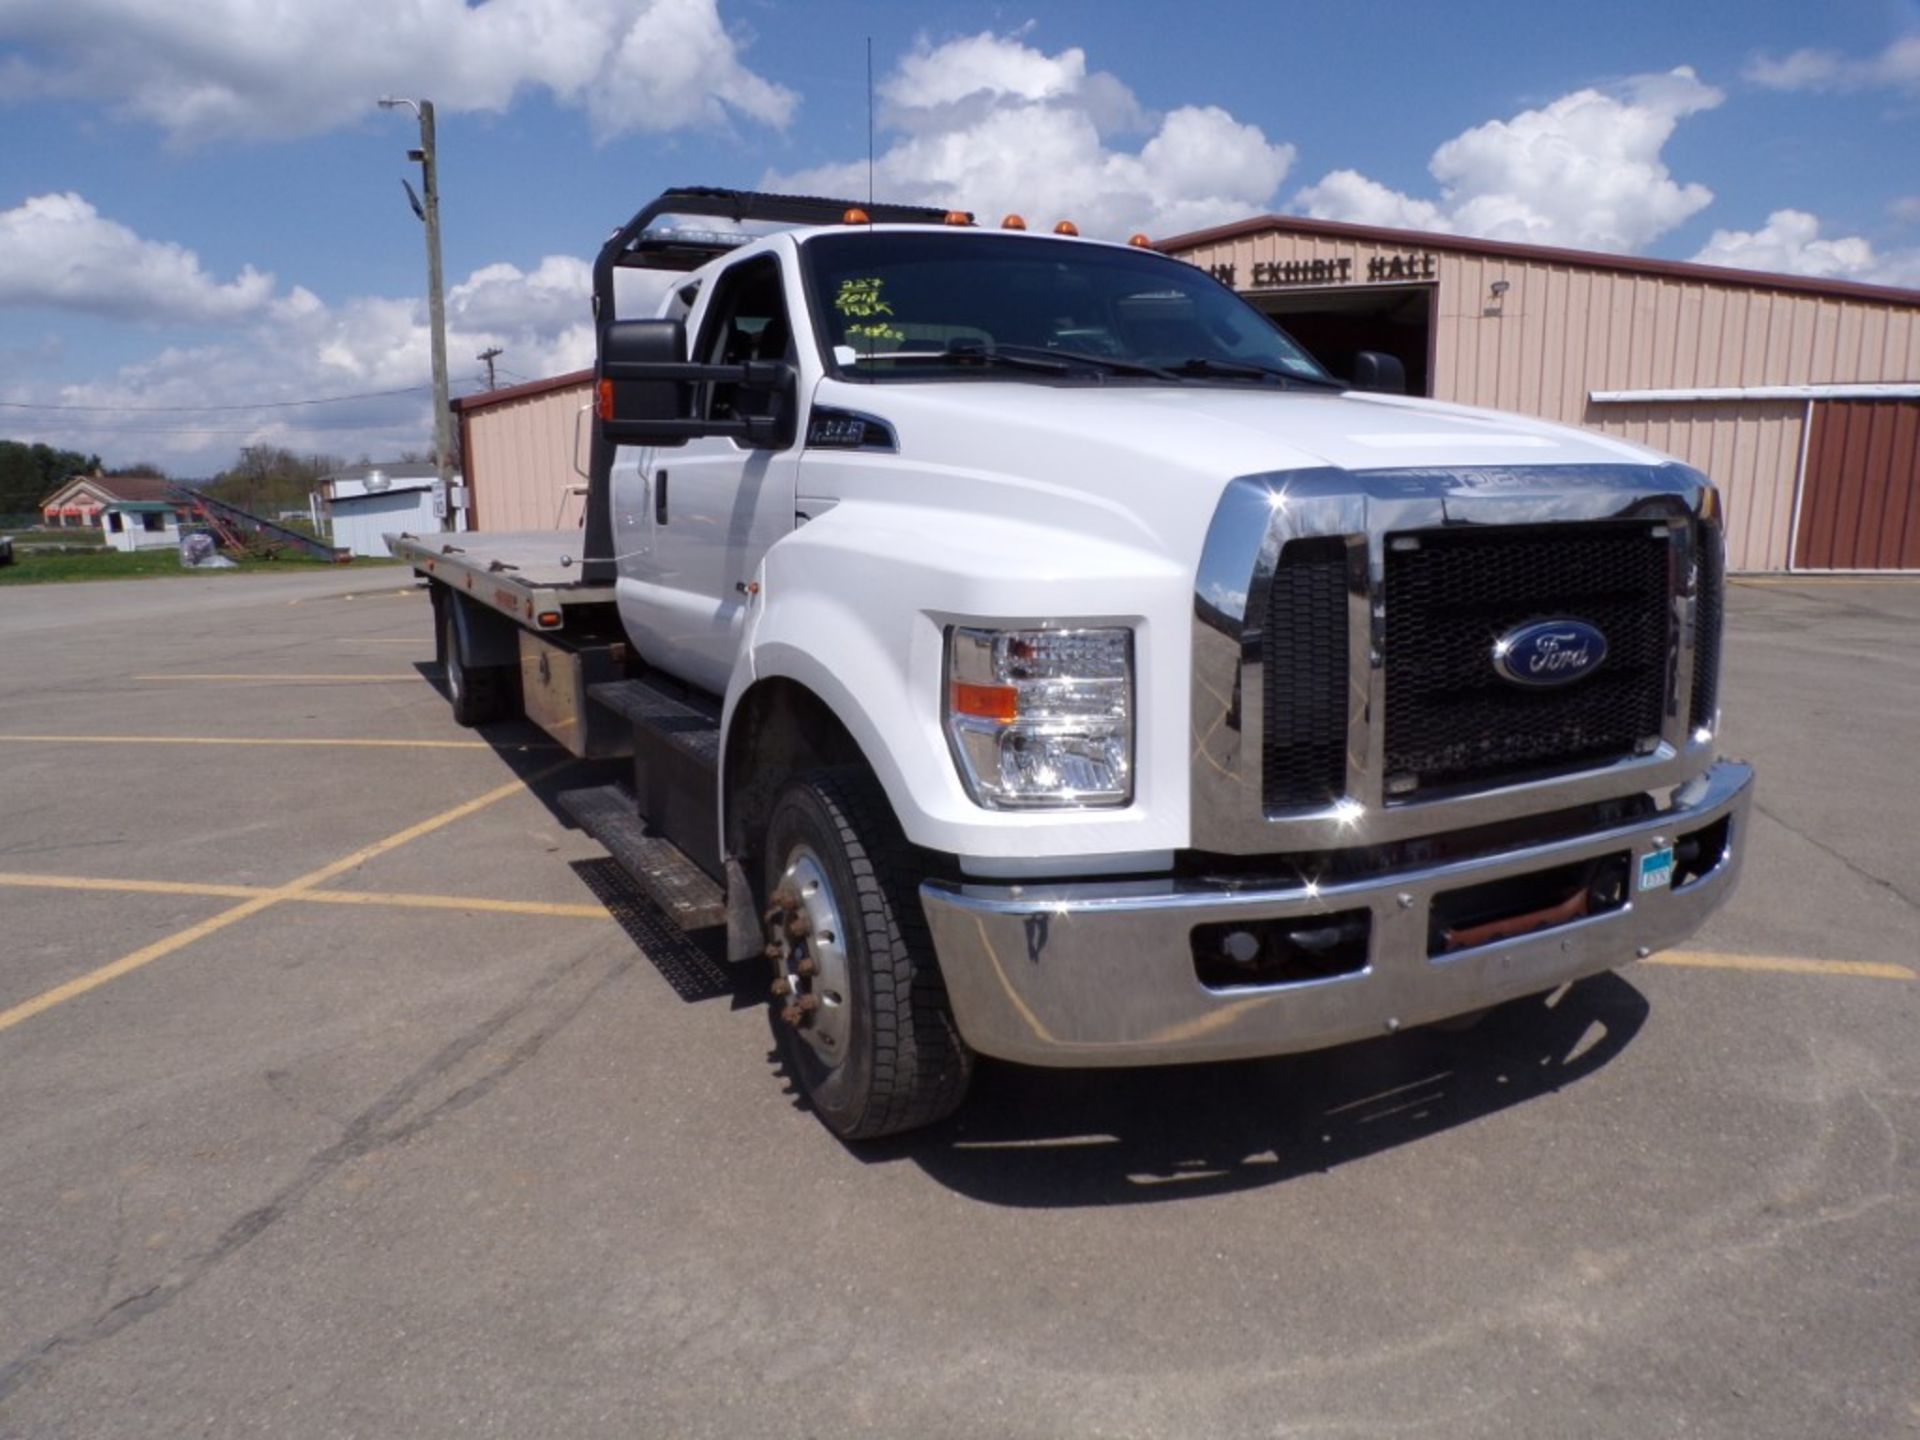 2018 Ford F650 Ext. Cab, Rollback Truck, 6.7 Dsl. Engine, Auto Trans, Air Brakes, 25,900 GVWR, - Image 2 of 13